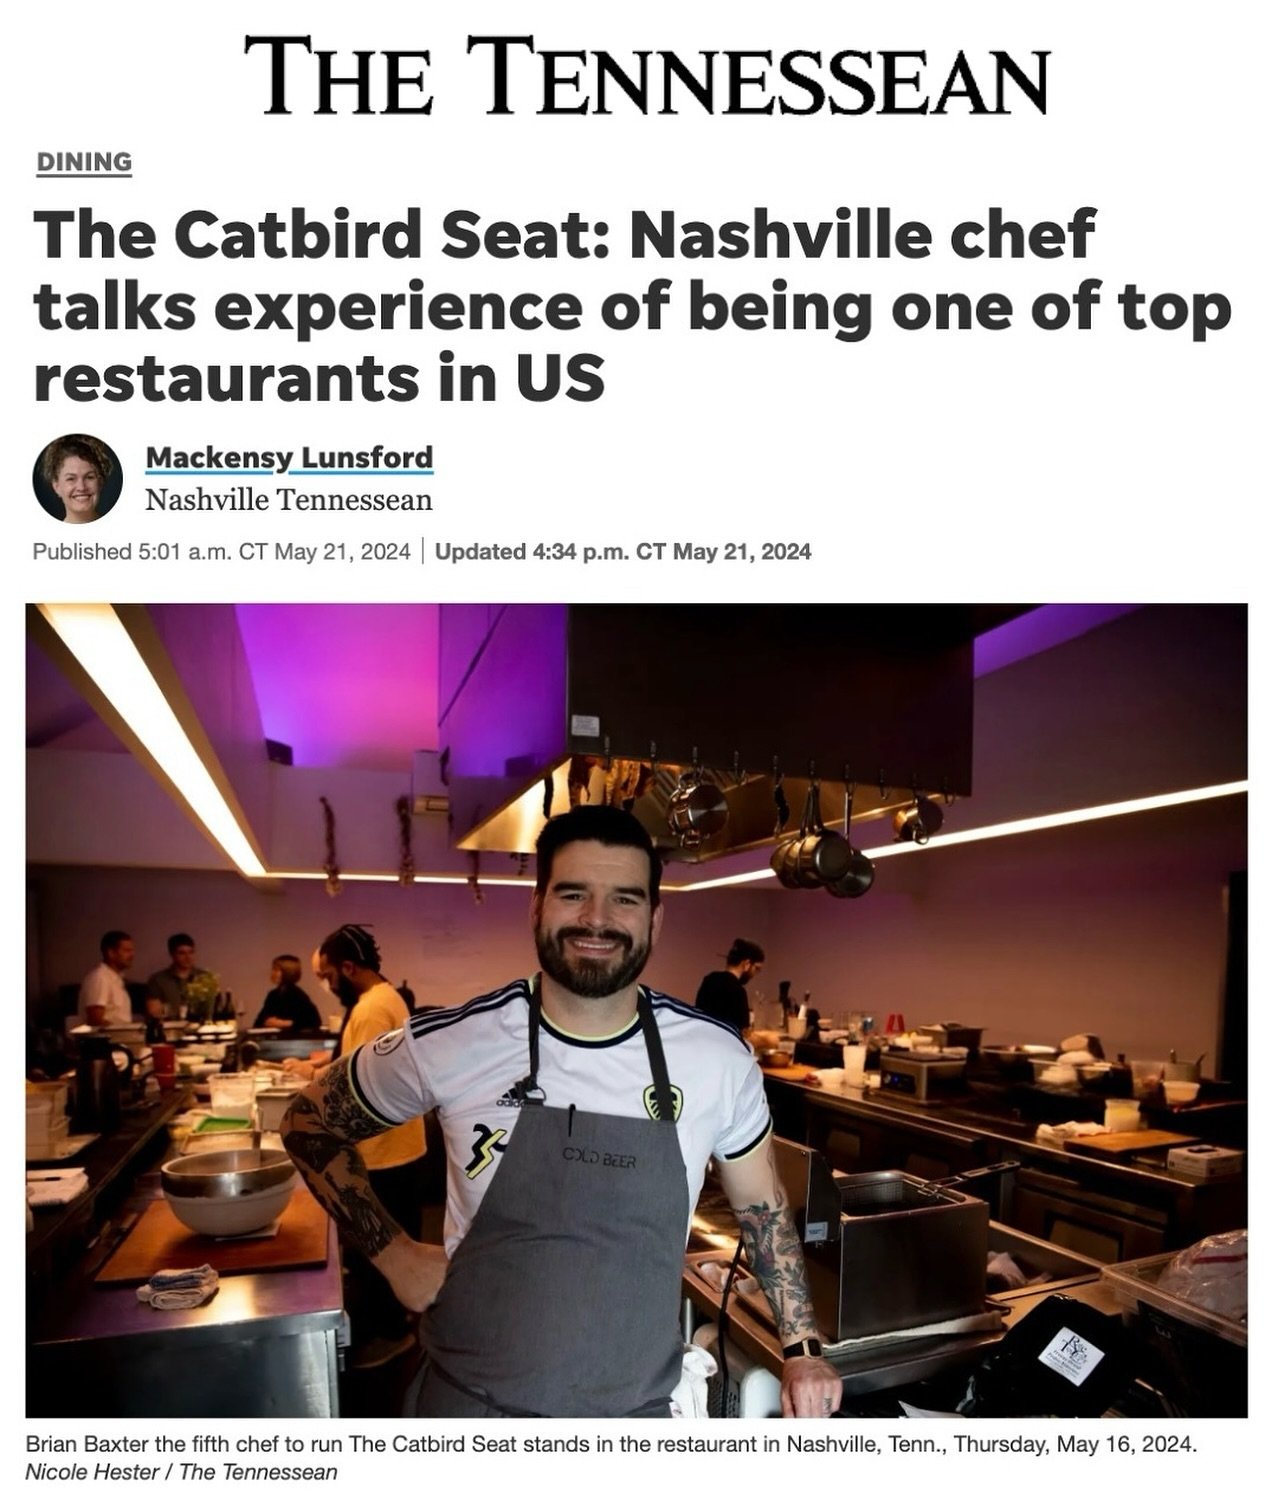 We are so proud of all Chef Baxter has accomplished over the past four years at The Catbird Seat. As his tenure comes to a close later this year, we&rsquo;re reminded of how special his time at the helm has been. 

Thank you @mackensylunsford @tennes